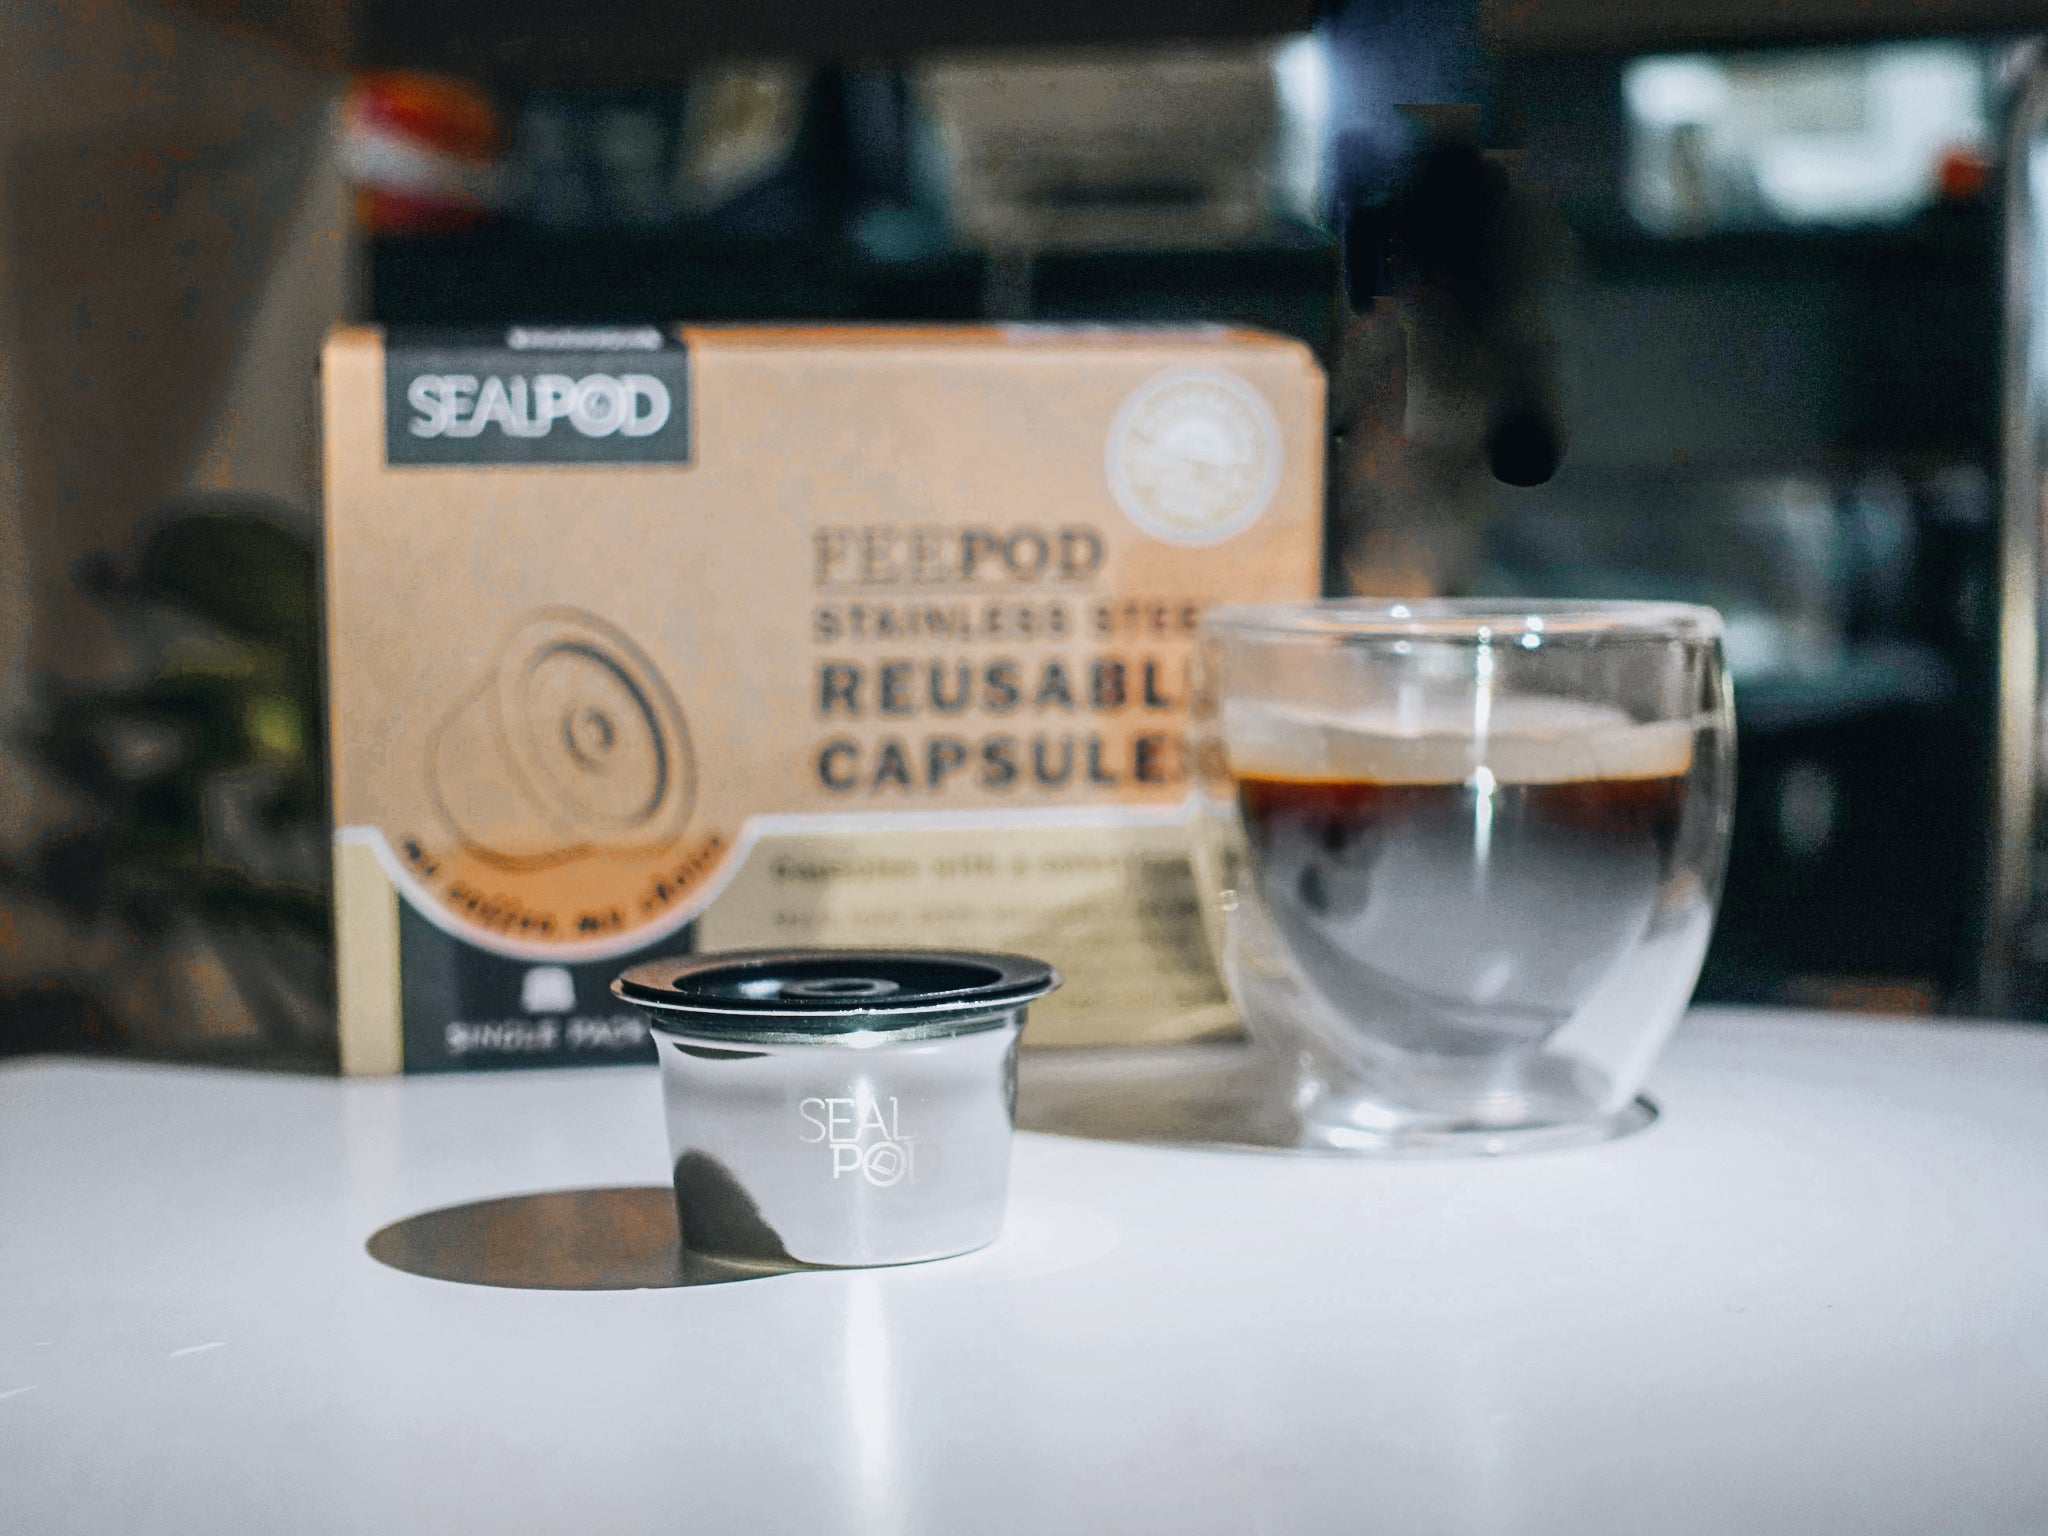 Stainless steel reusable coffee capsule for Caffitaly/K-Fee/Cafissimo